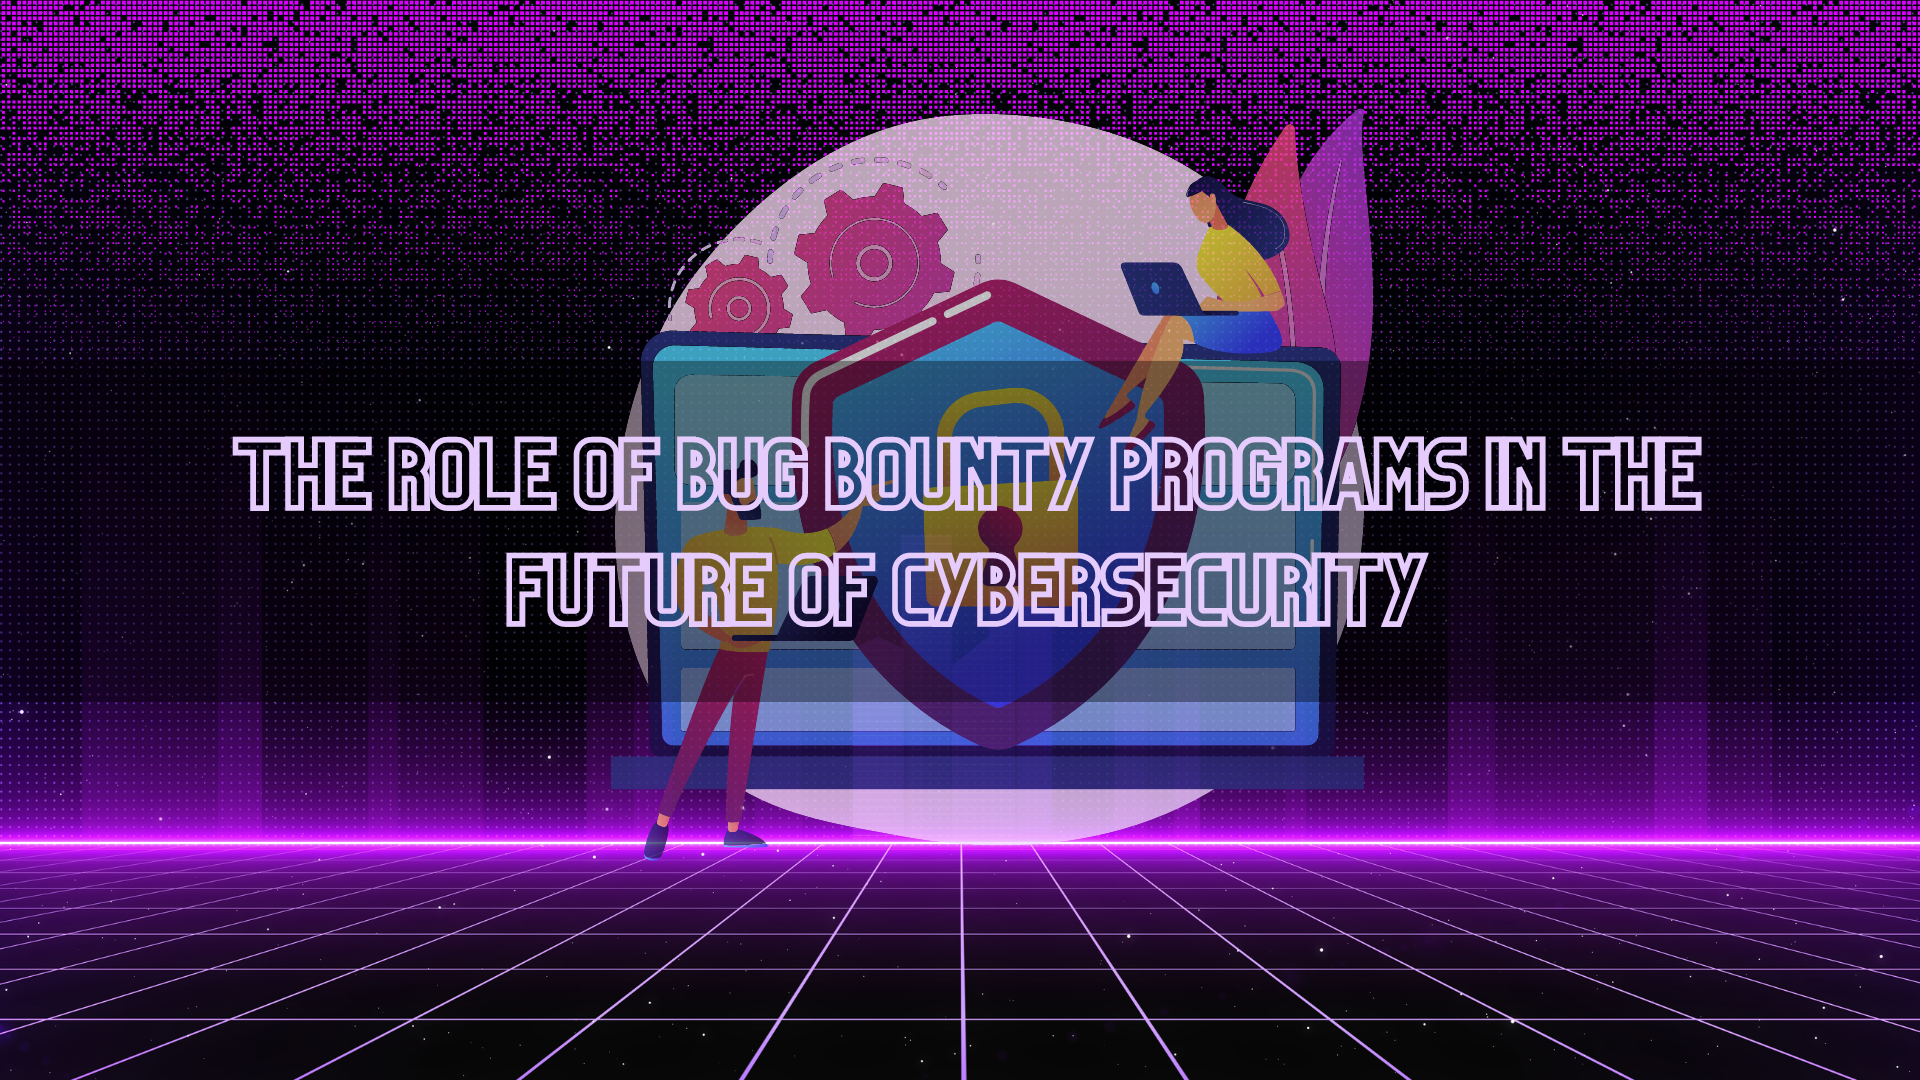 The Role of Bug Bounty Programs in the Future of Cybersecurity (1)